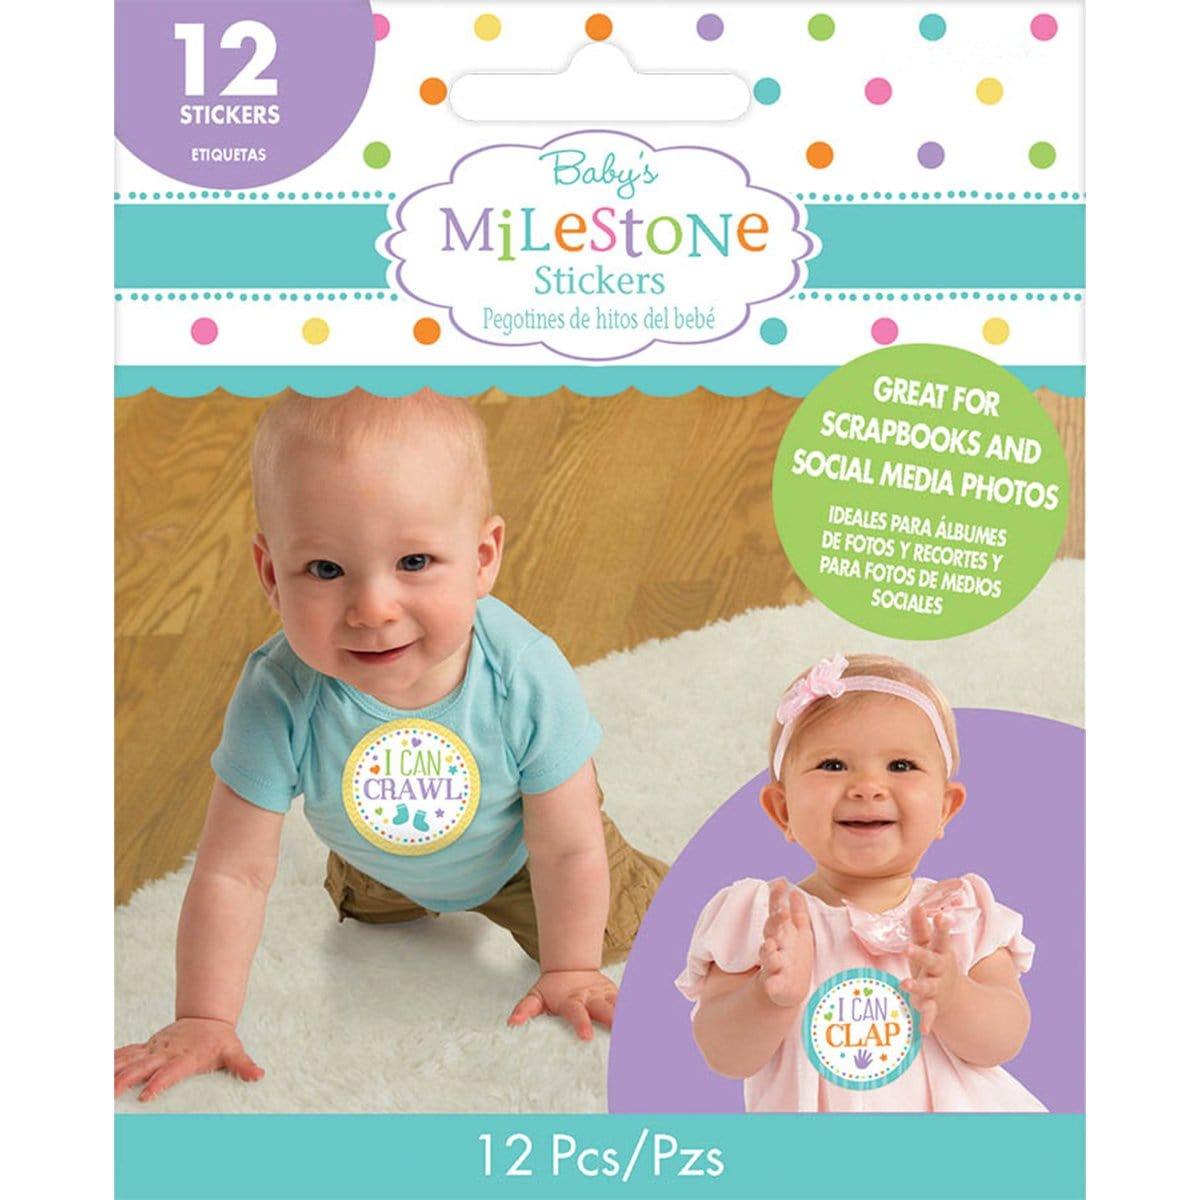 Buy Baby Shower Baby's milestone stickers, 12 per package sold at Party Expert